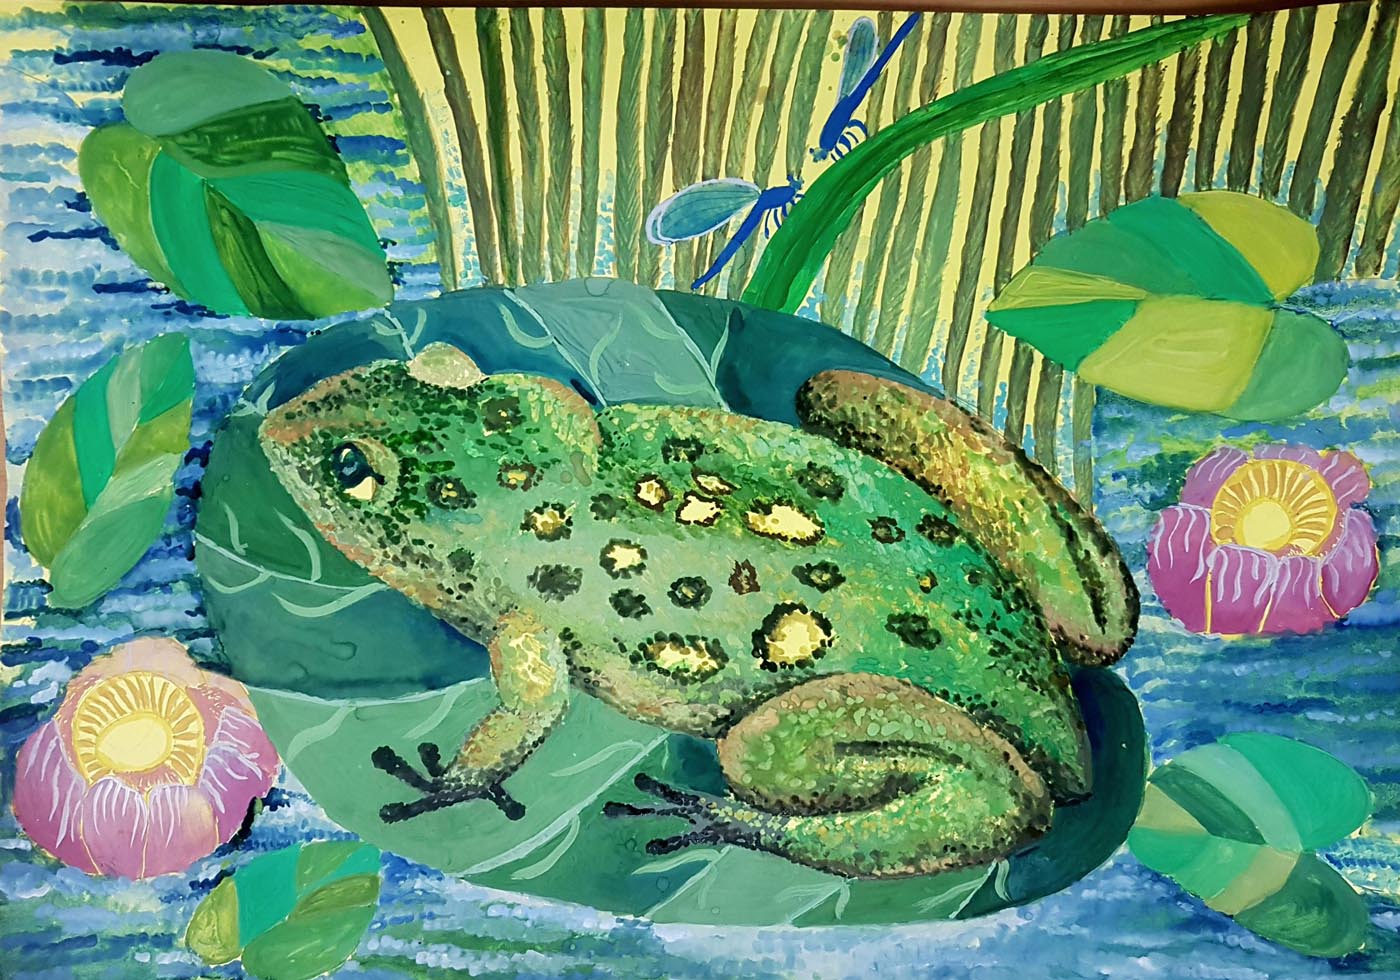 Dmitry Shachnev Russia 2021 save the frogs art contest